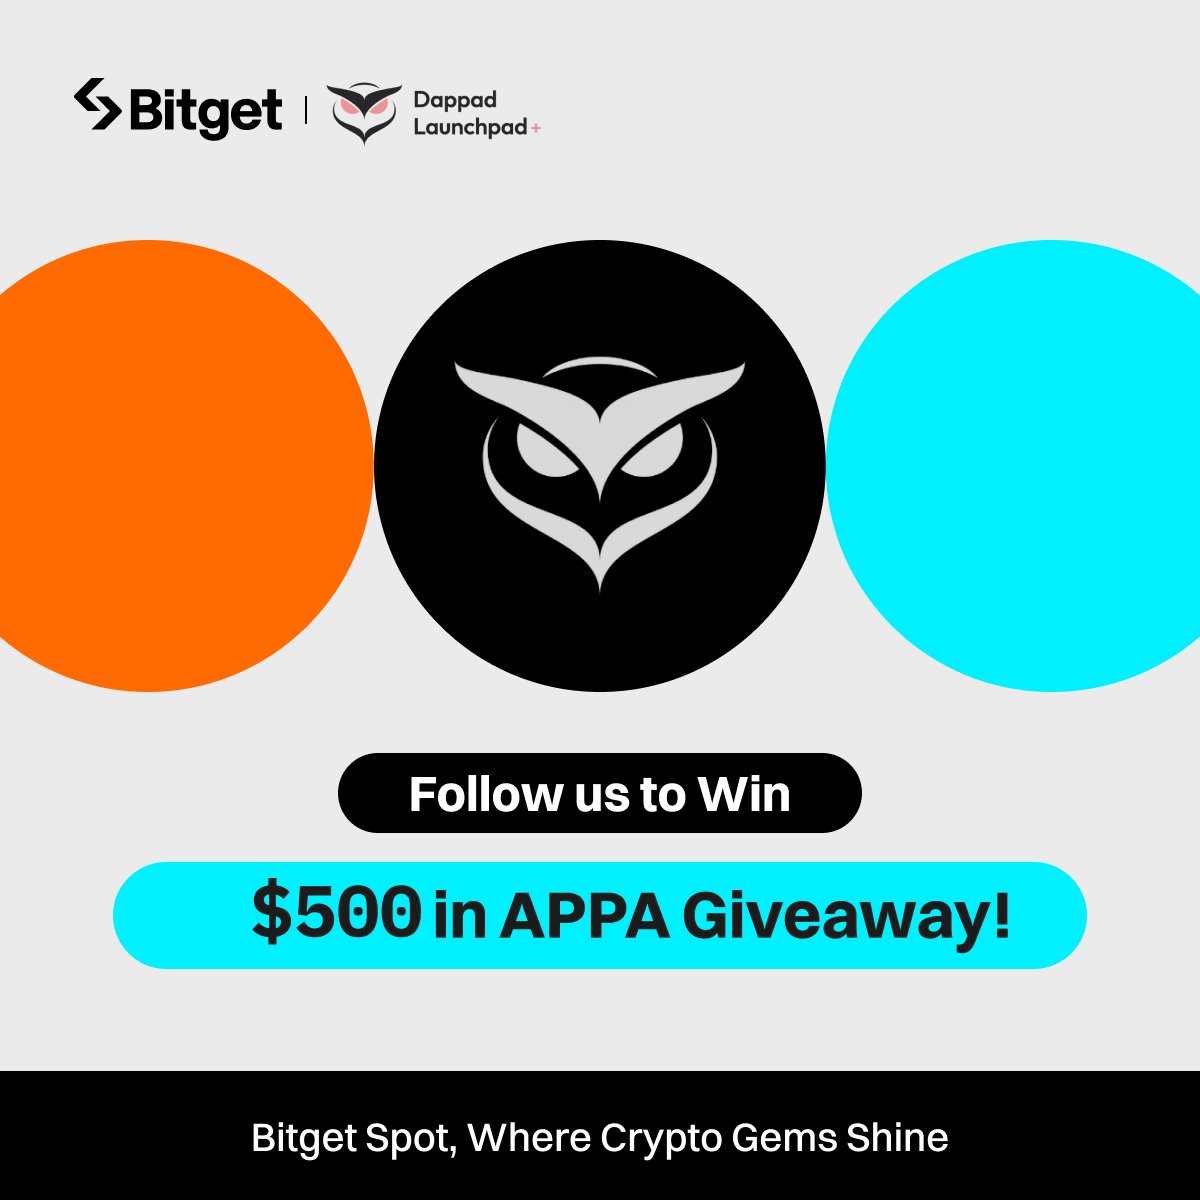 Join the #Bitget x $APPA Giveaway! 💰 $500 worth of $APPA (10 winners) 1⃣ Follow @bitgetglobal @Dappadofficial 2⃣ Repost with #DappadListBitget & tag your friends 3⃣ Fill out the form: forms.gle/9s78TupycRpV6L…